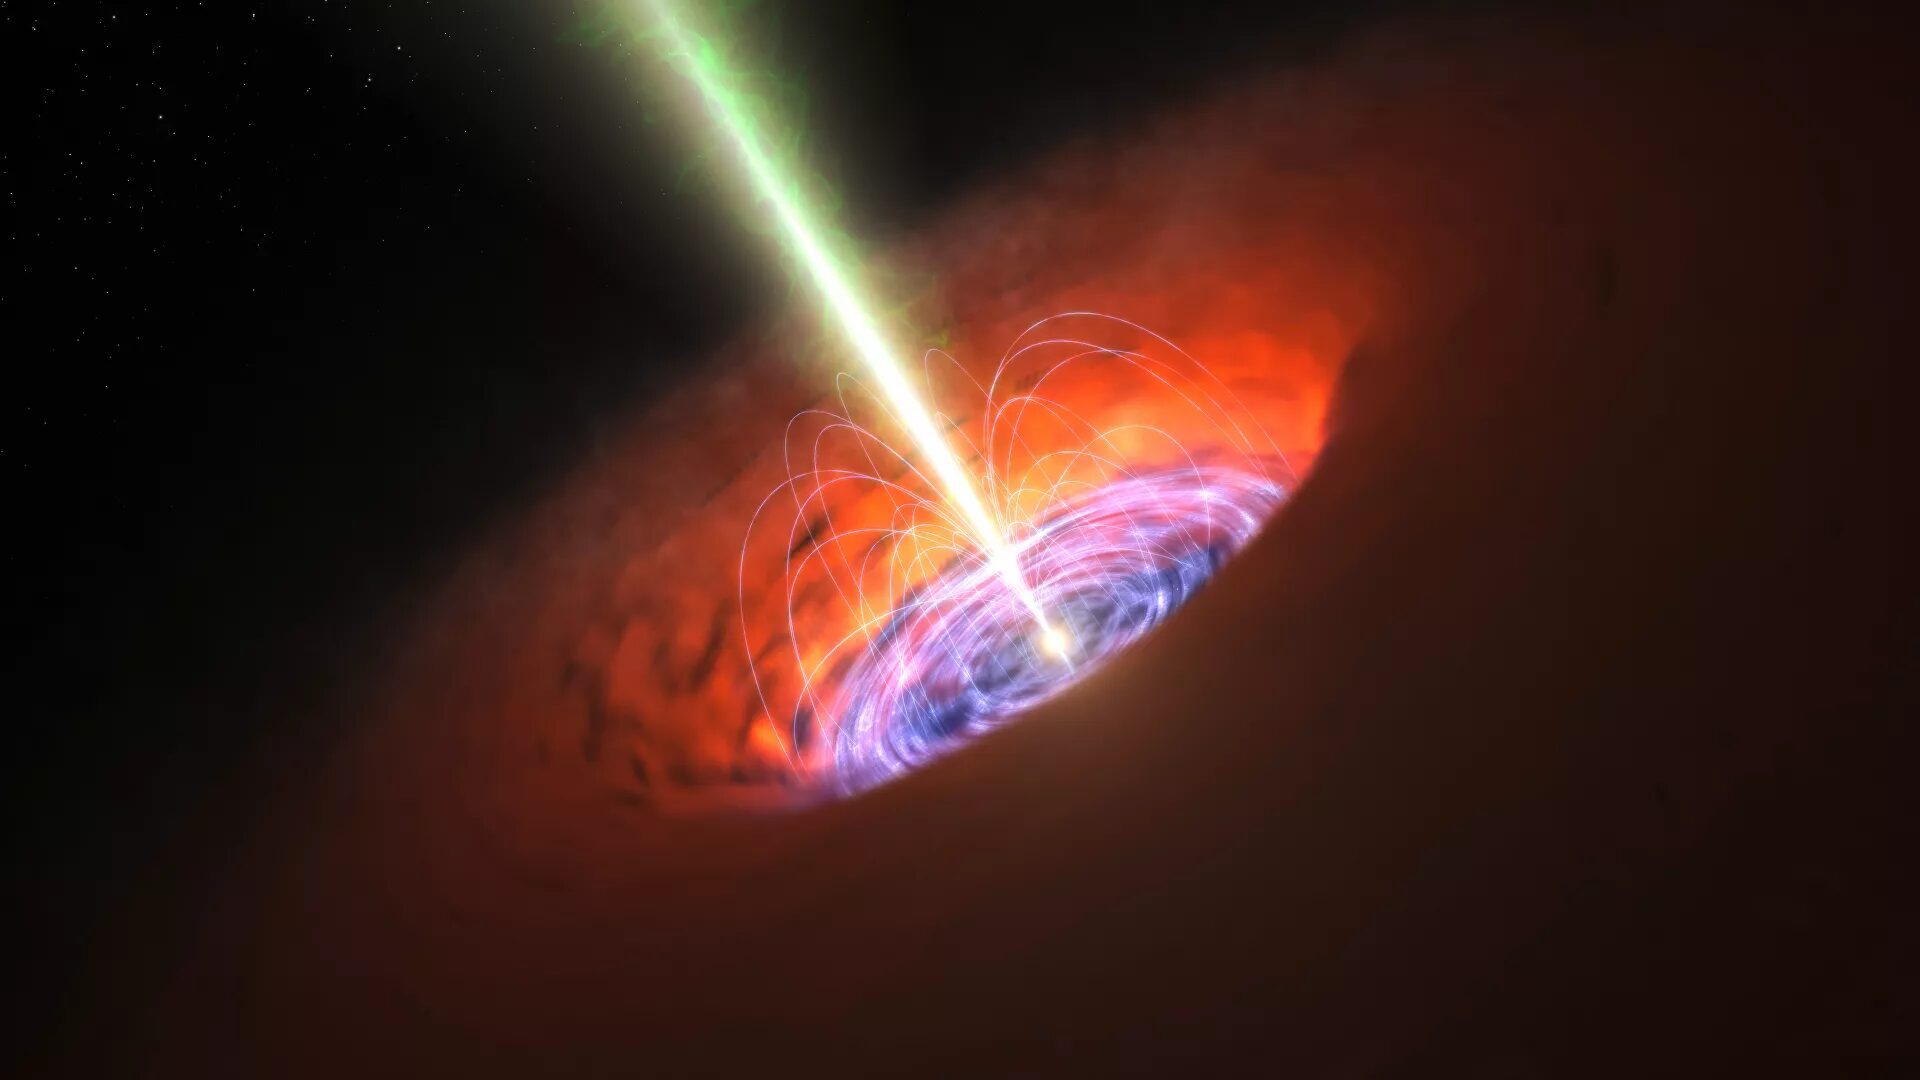 Merging Waltz Caltech Finds Two Supermassive Black Holes Set To 